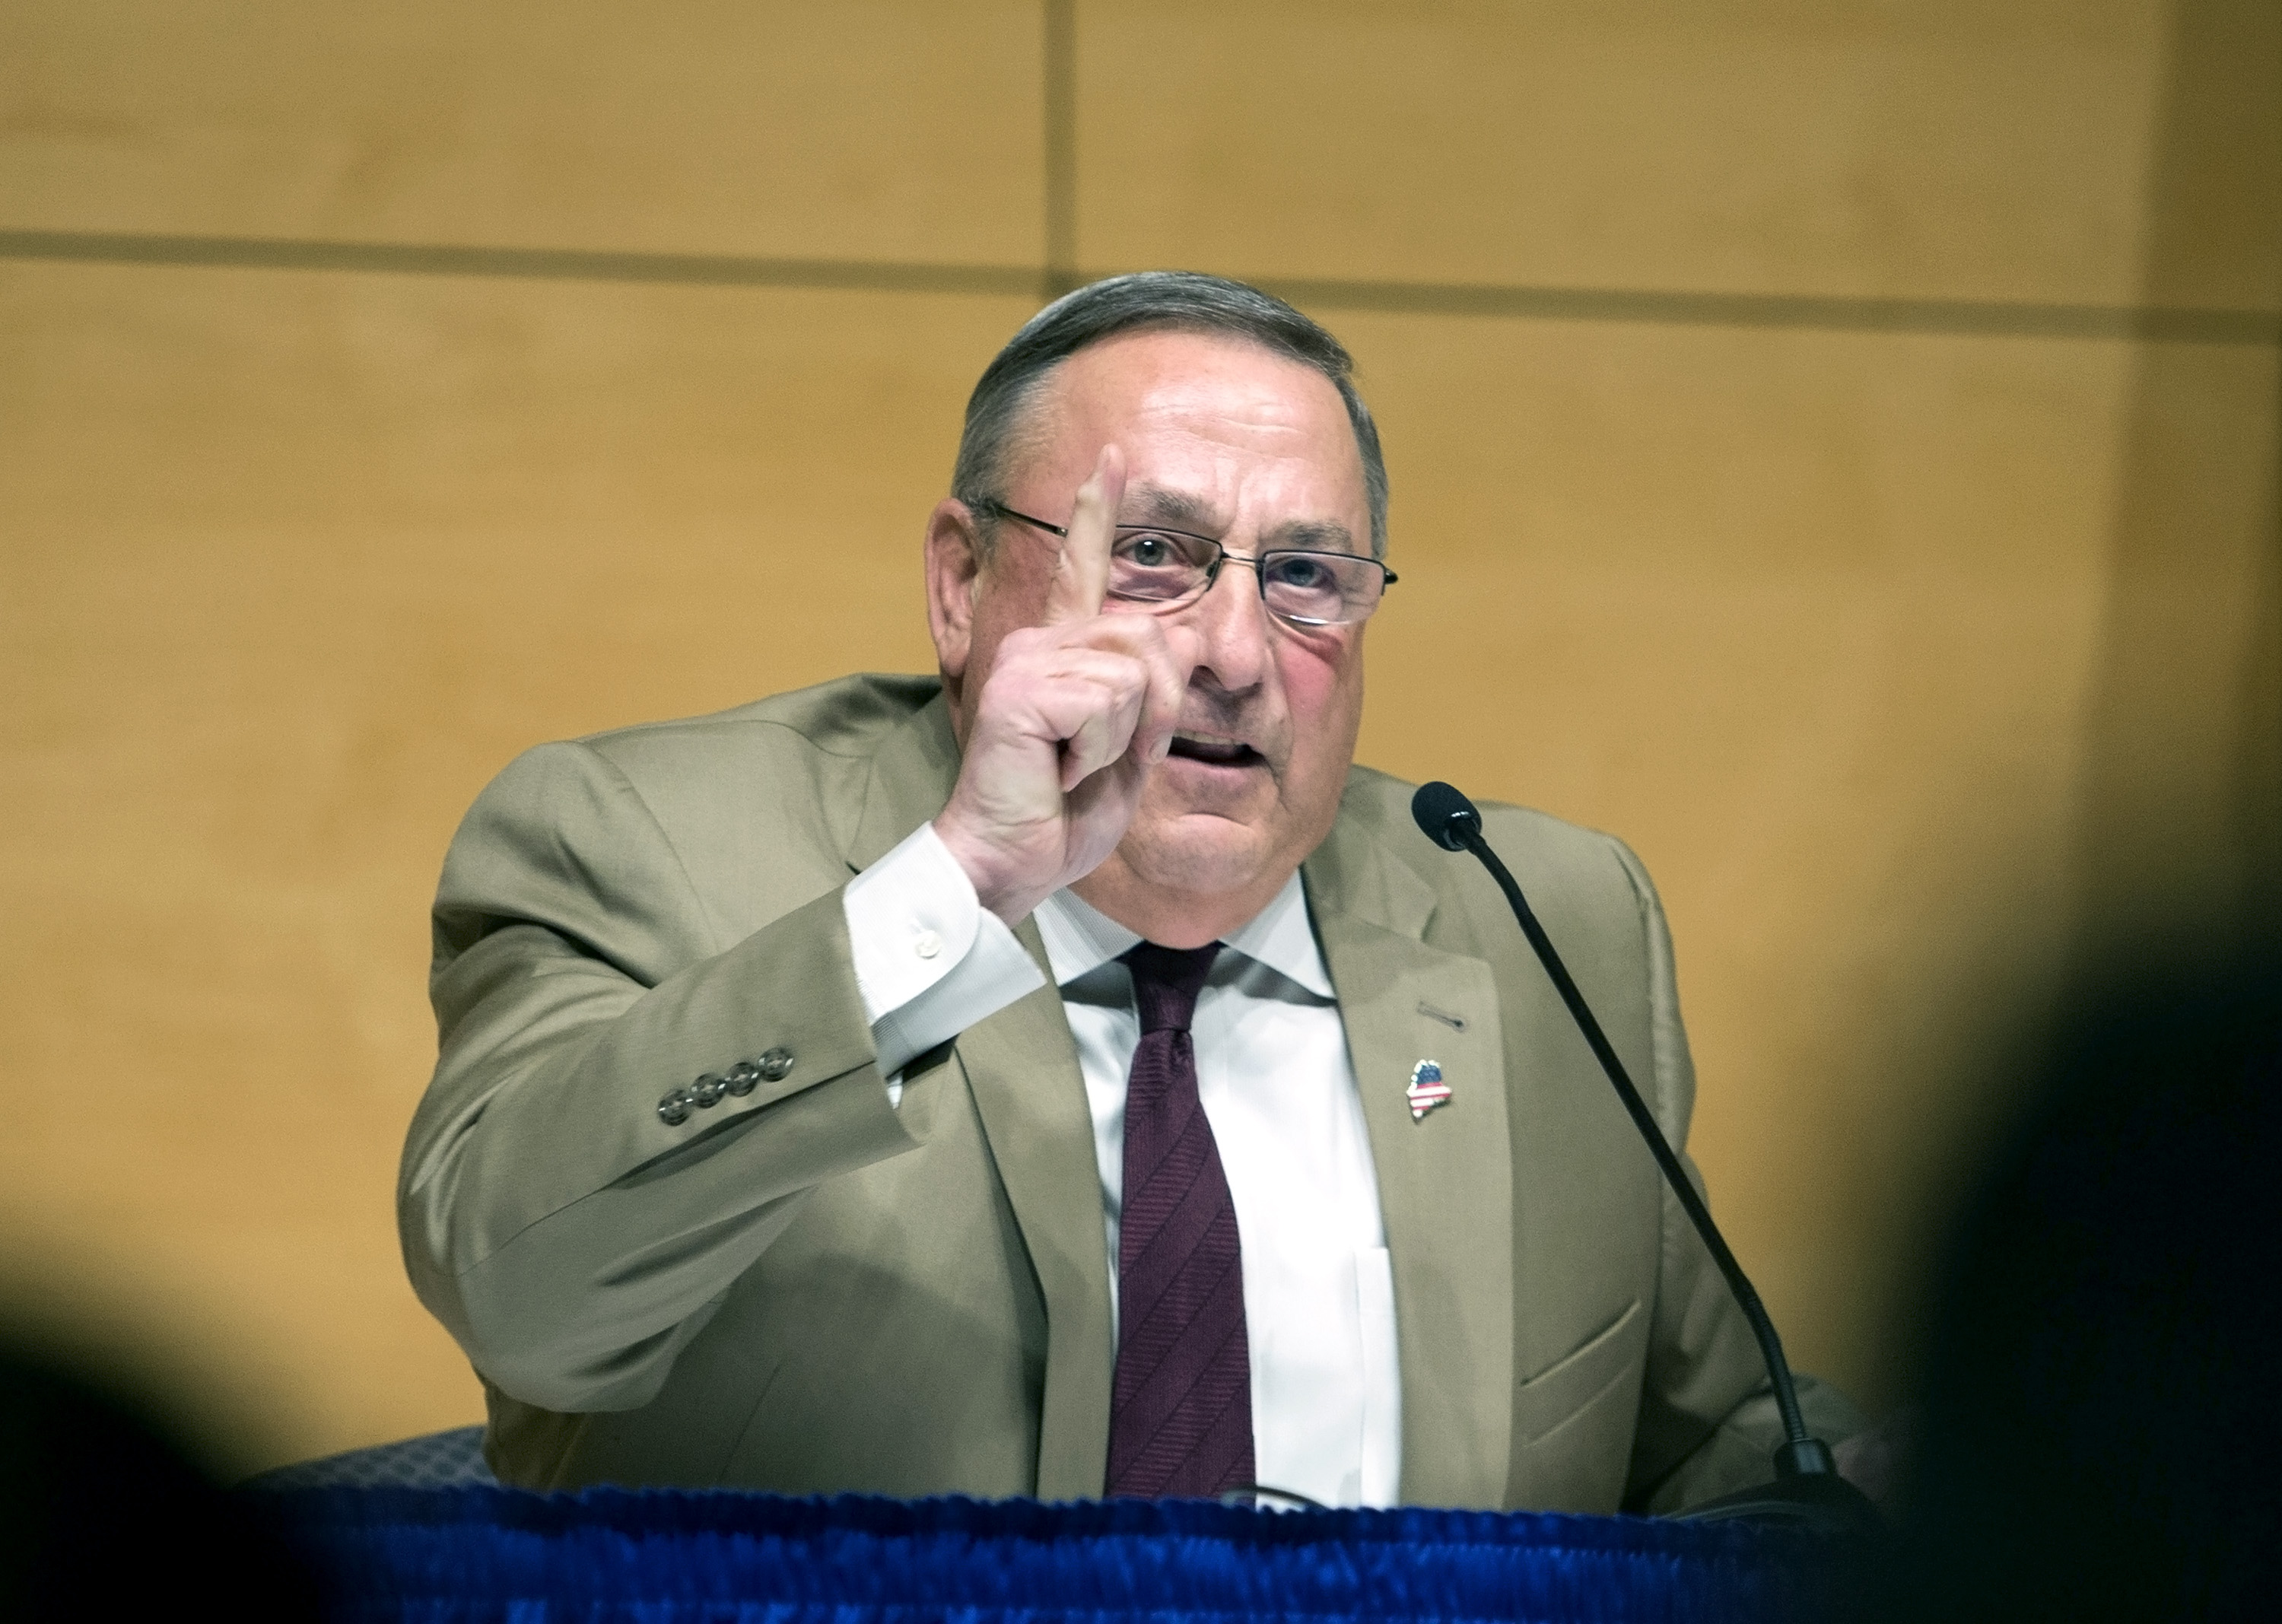 Gov. LePage brings his town hall tour to Portland